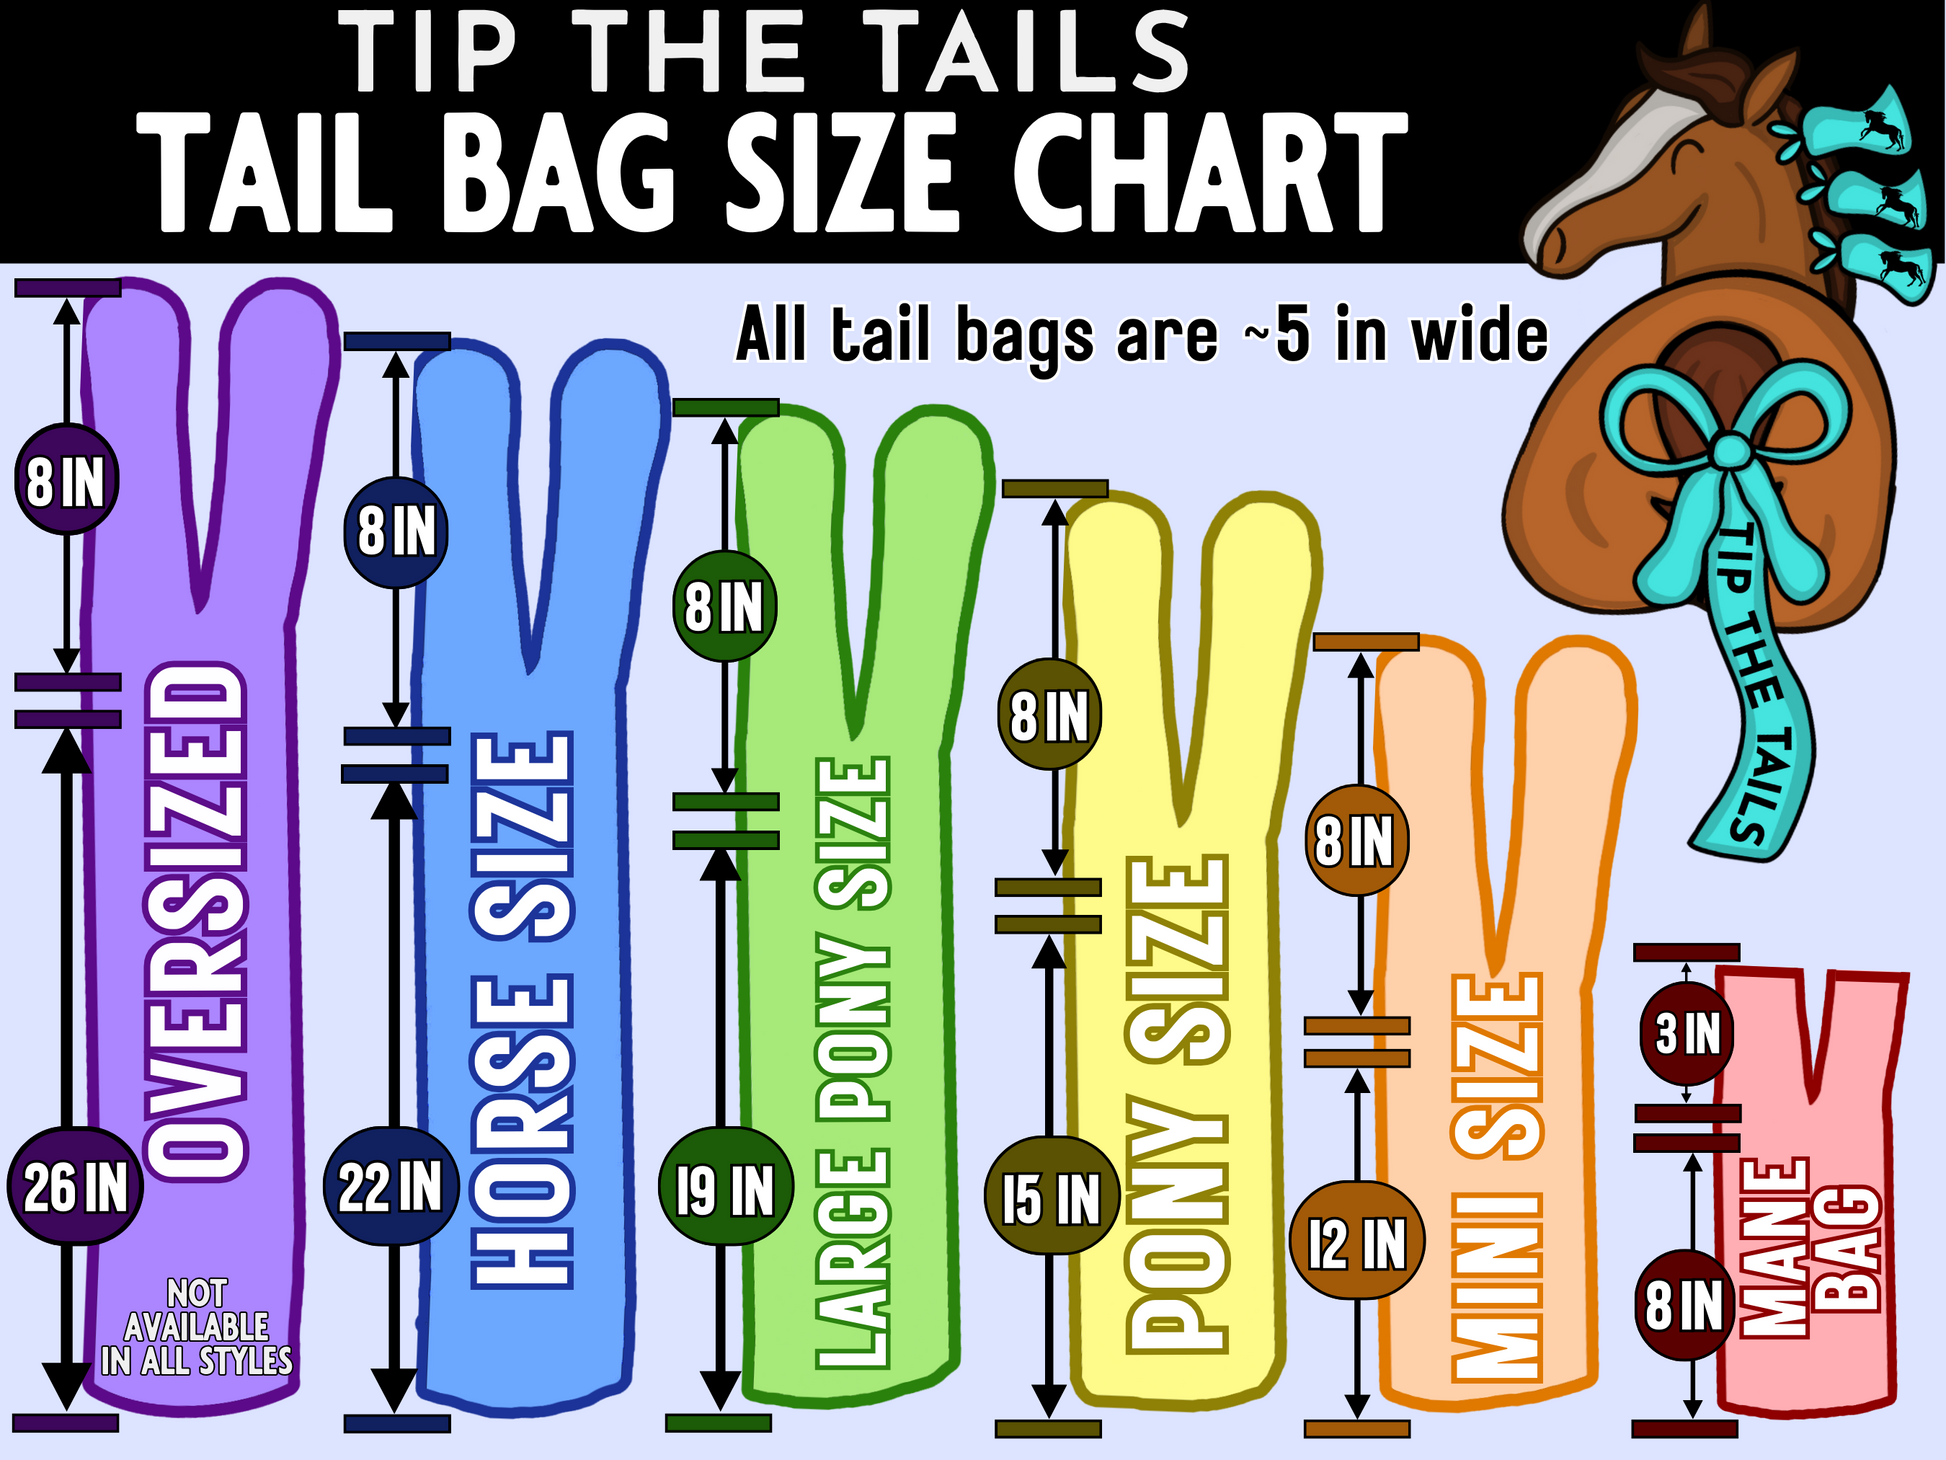 Blue Ariat Equine Tail Bag-Tip The Tails